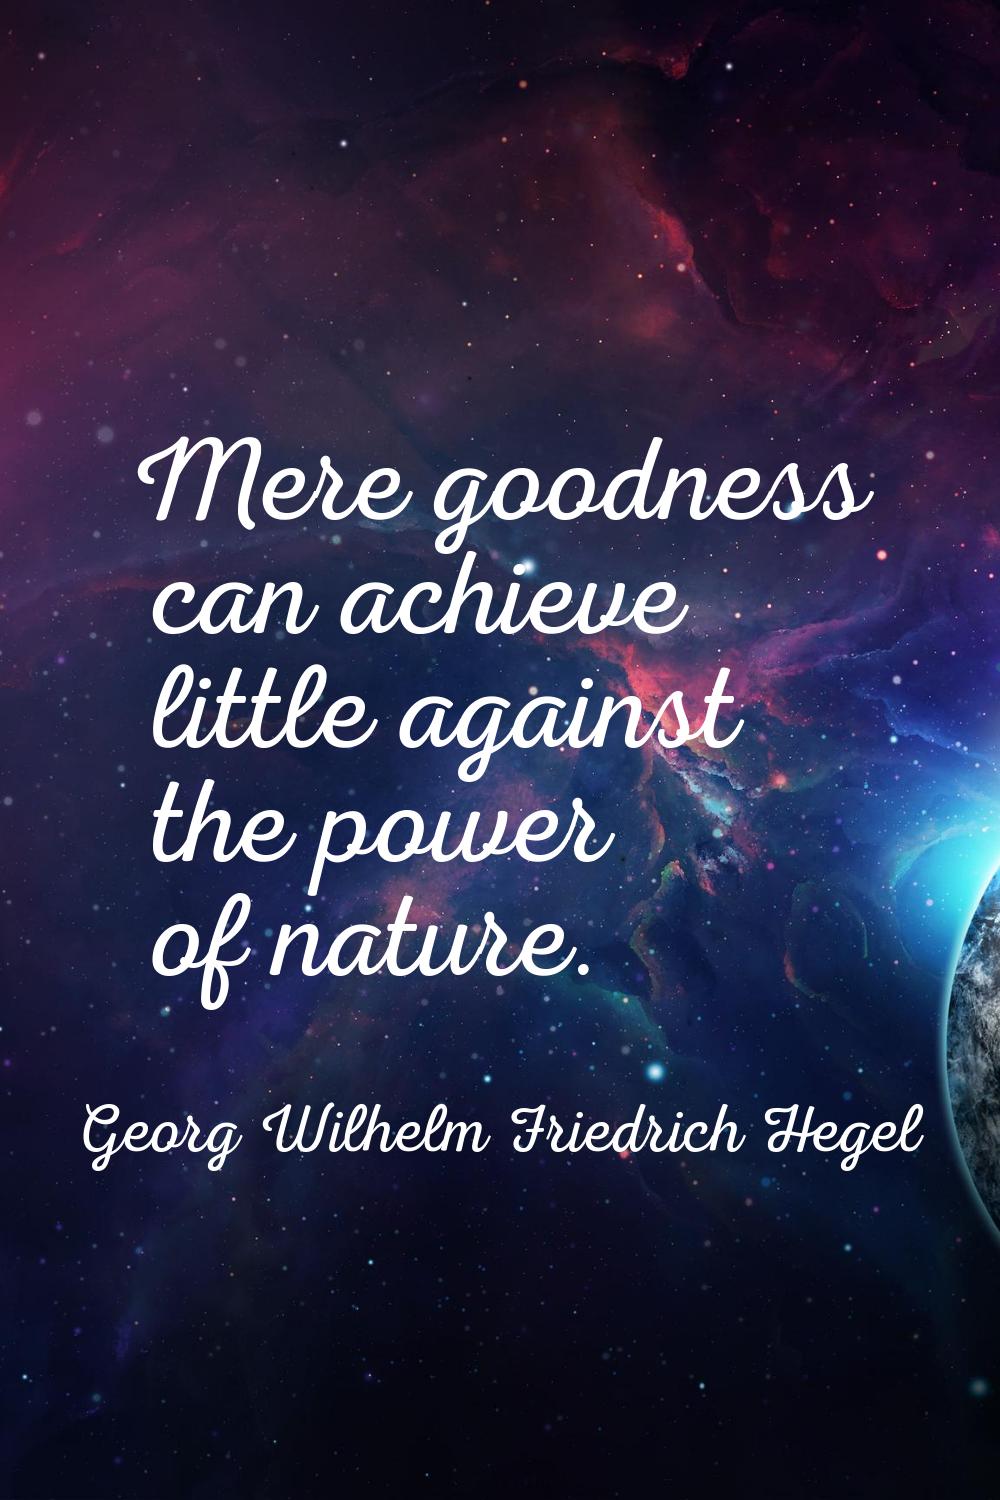 Mere goodness can achieve little against the power of nature.